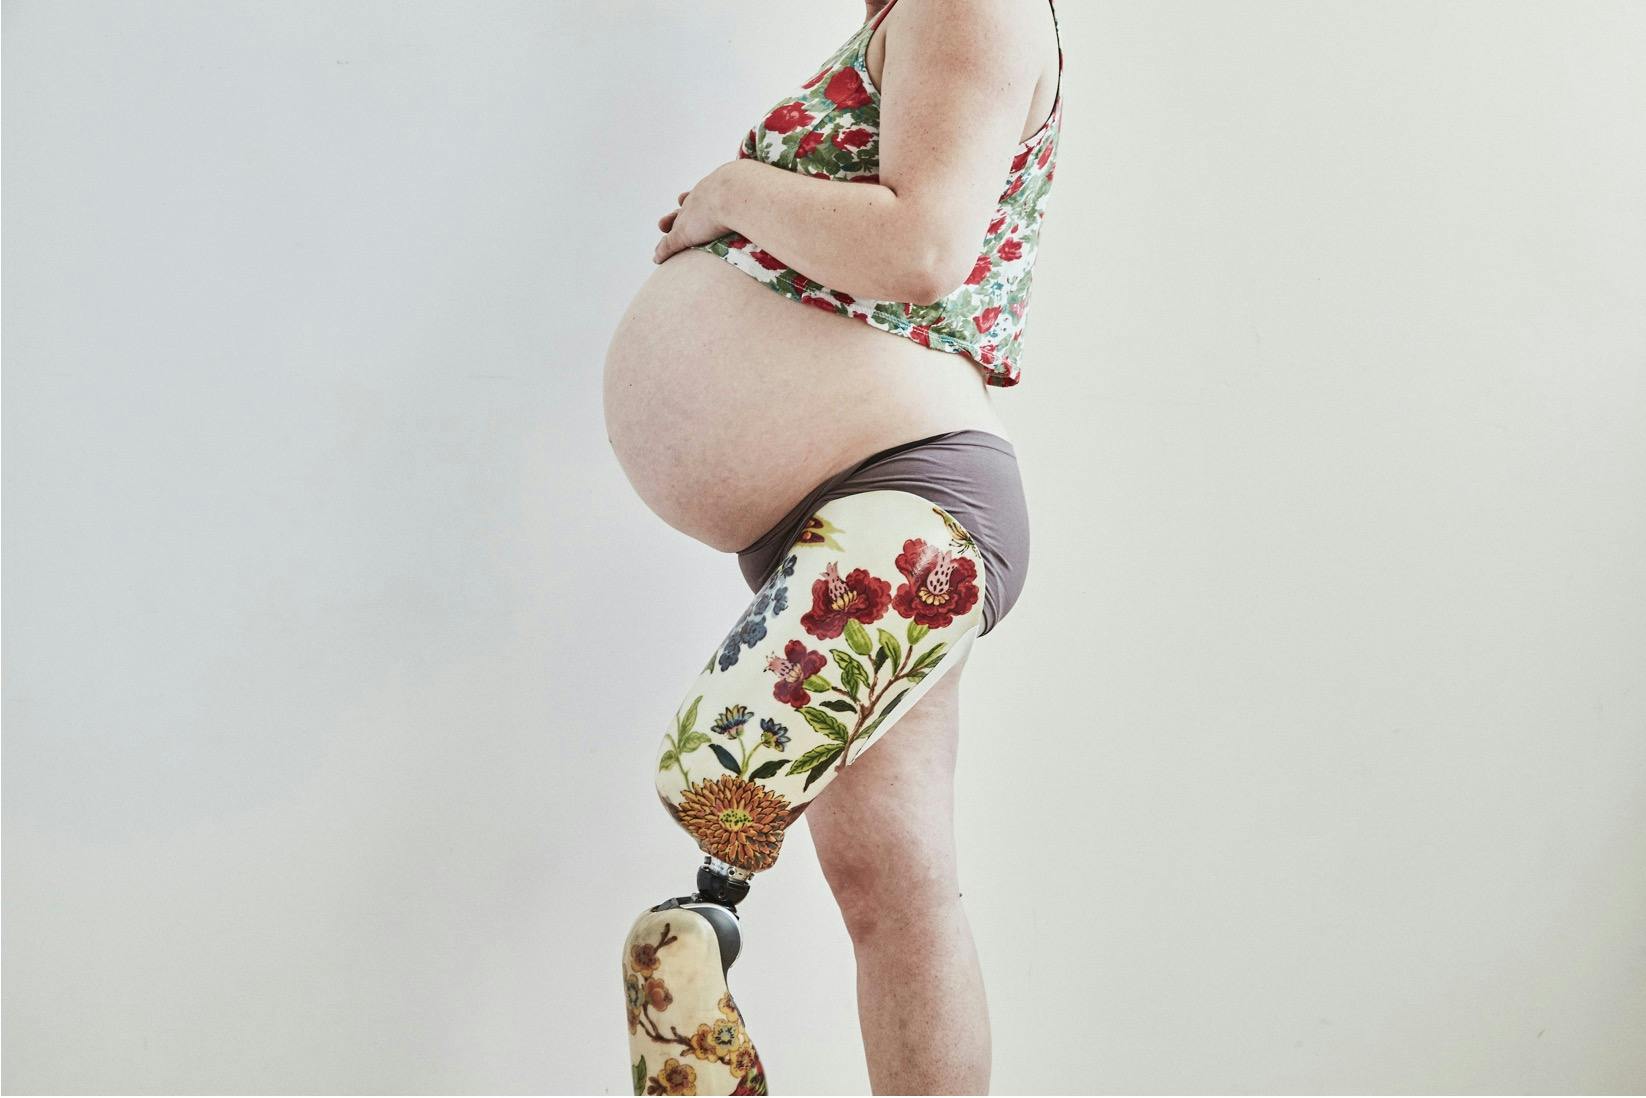 Taking Action: The Woman Who Created Her Own Disability Maternity Photos